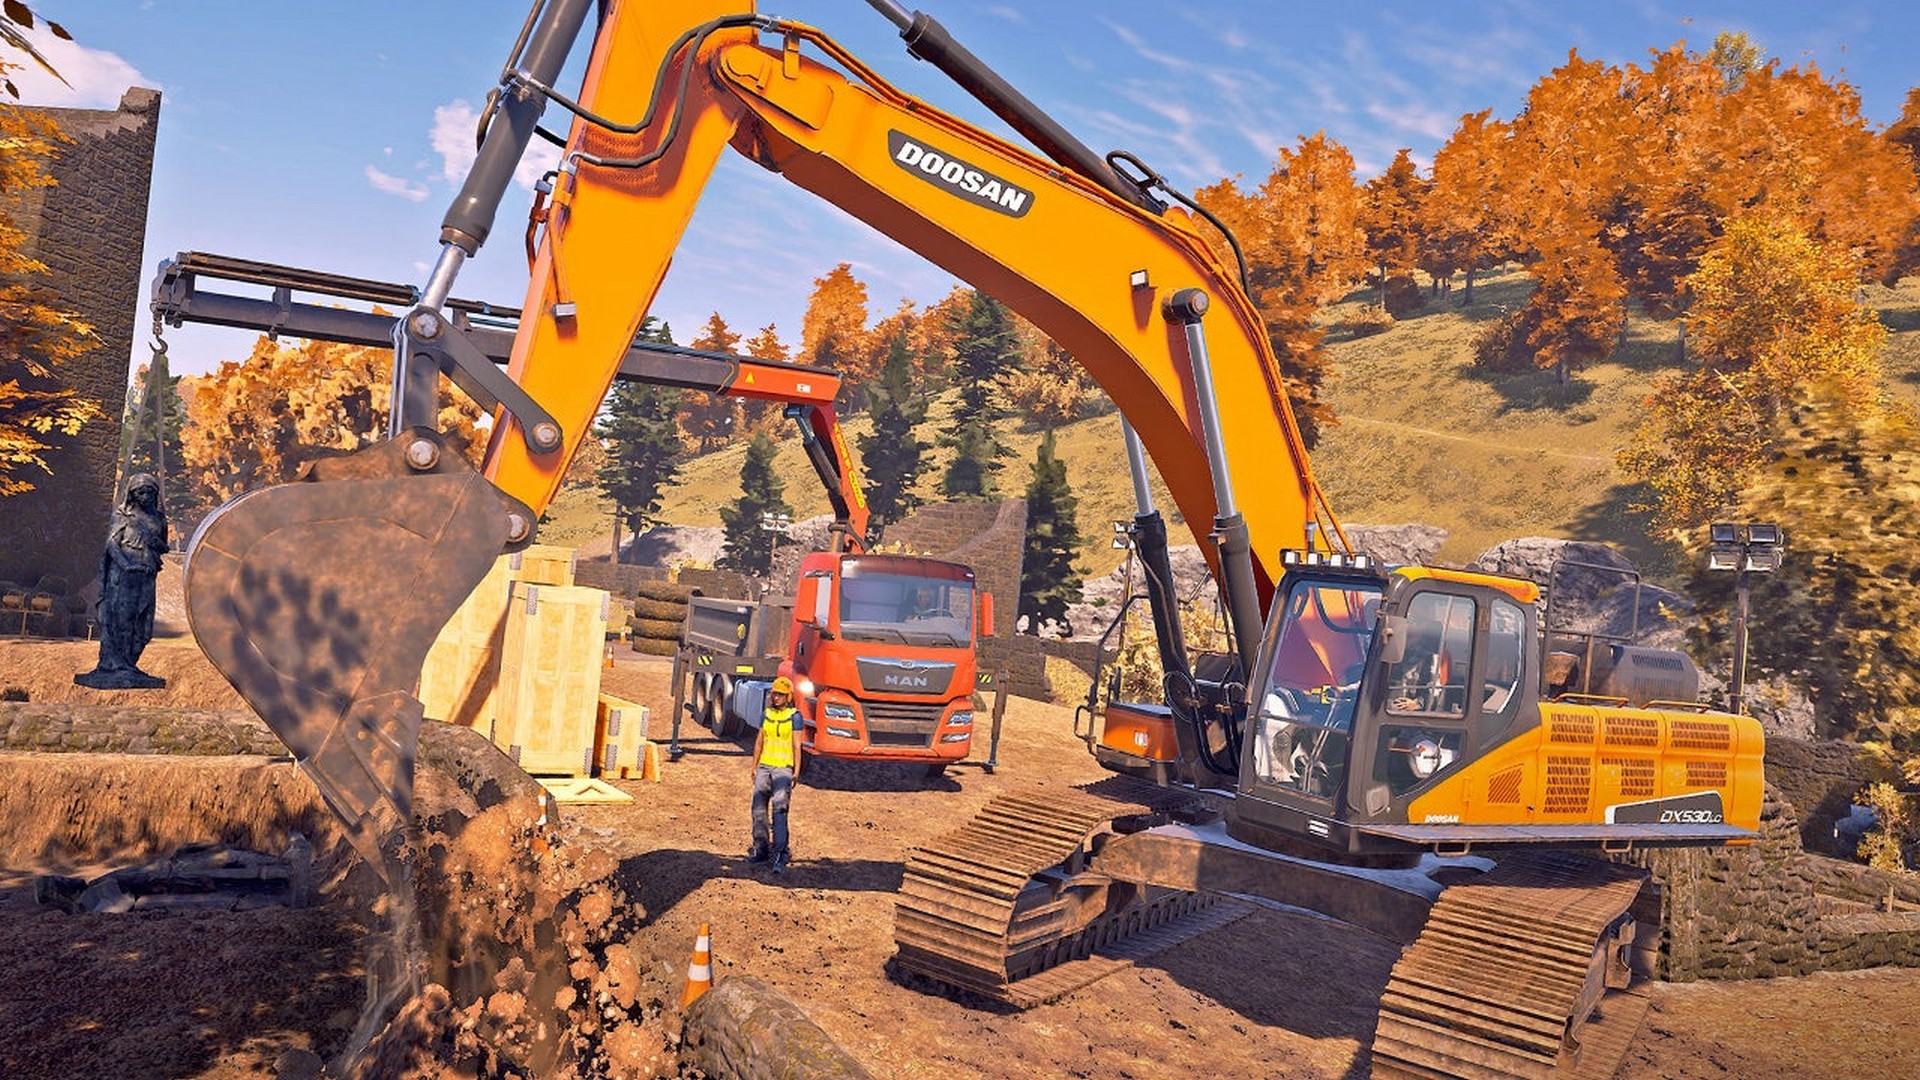 Construction Simulator To Launch Officially | With Machines From Brands Equipment World-Renowned 25 MKAU & Licensed Gaming